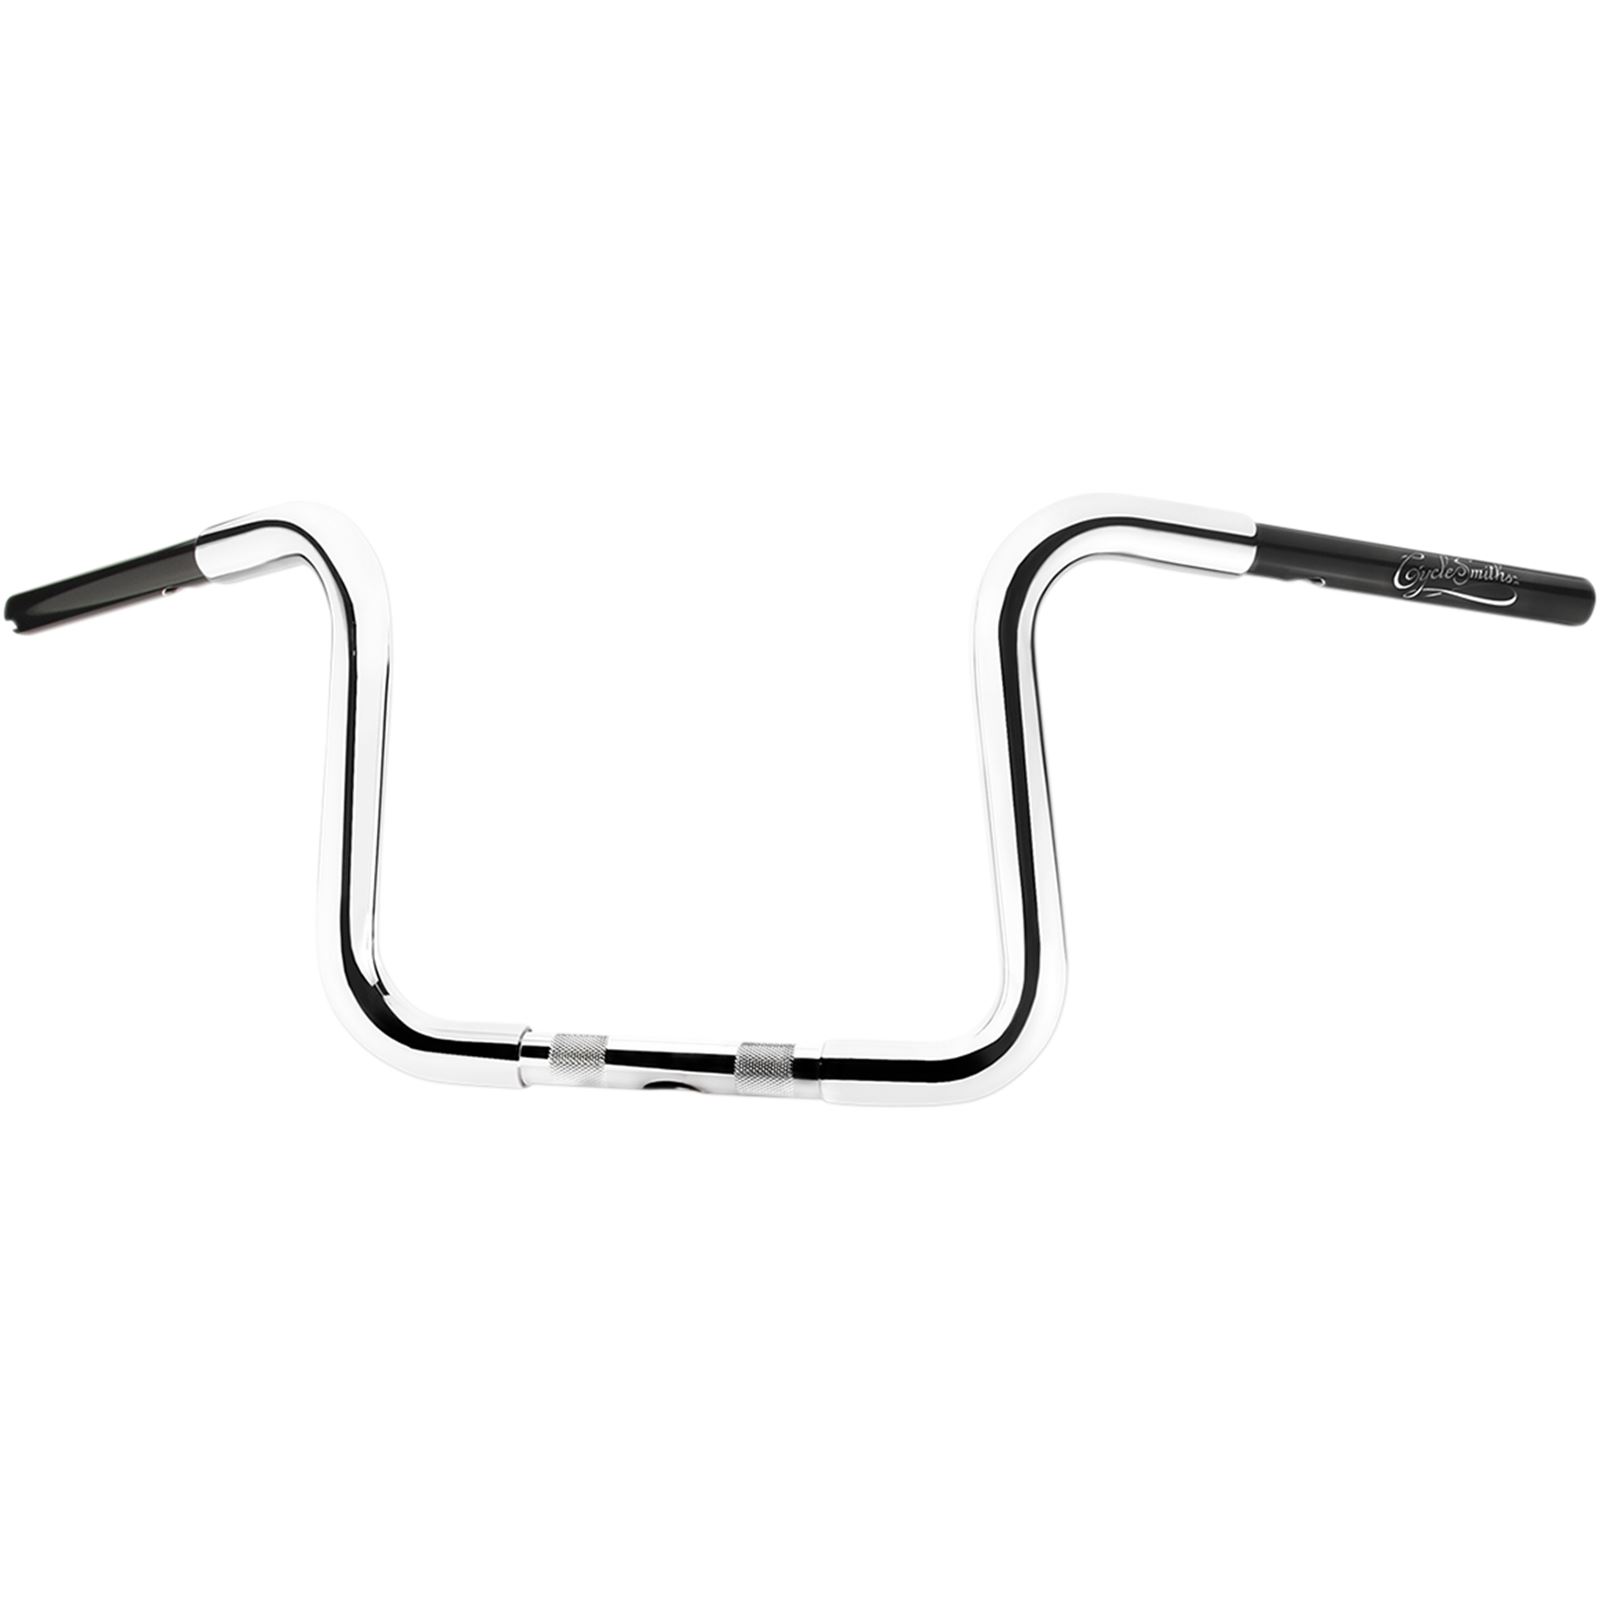 Cyclesmiths Chrome 10" California Ape Hanger Handlebar for Throttle-by-Wire and Heated Grips